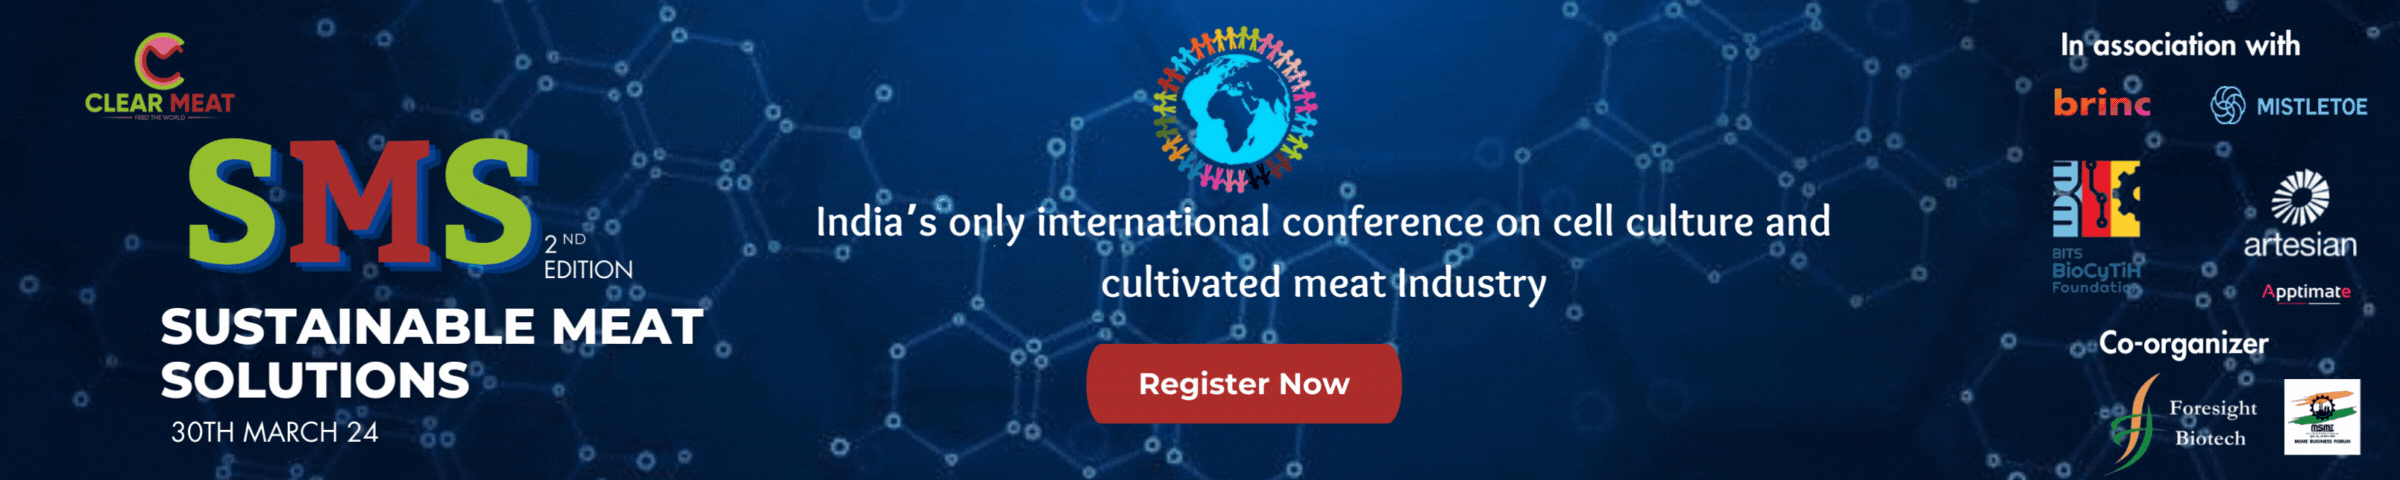 Clearmeat Online Summit Banner Image